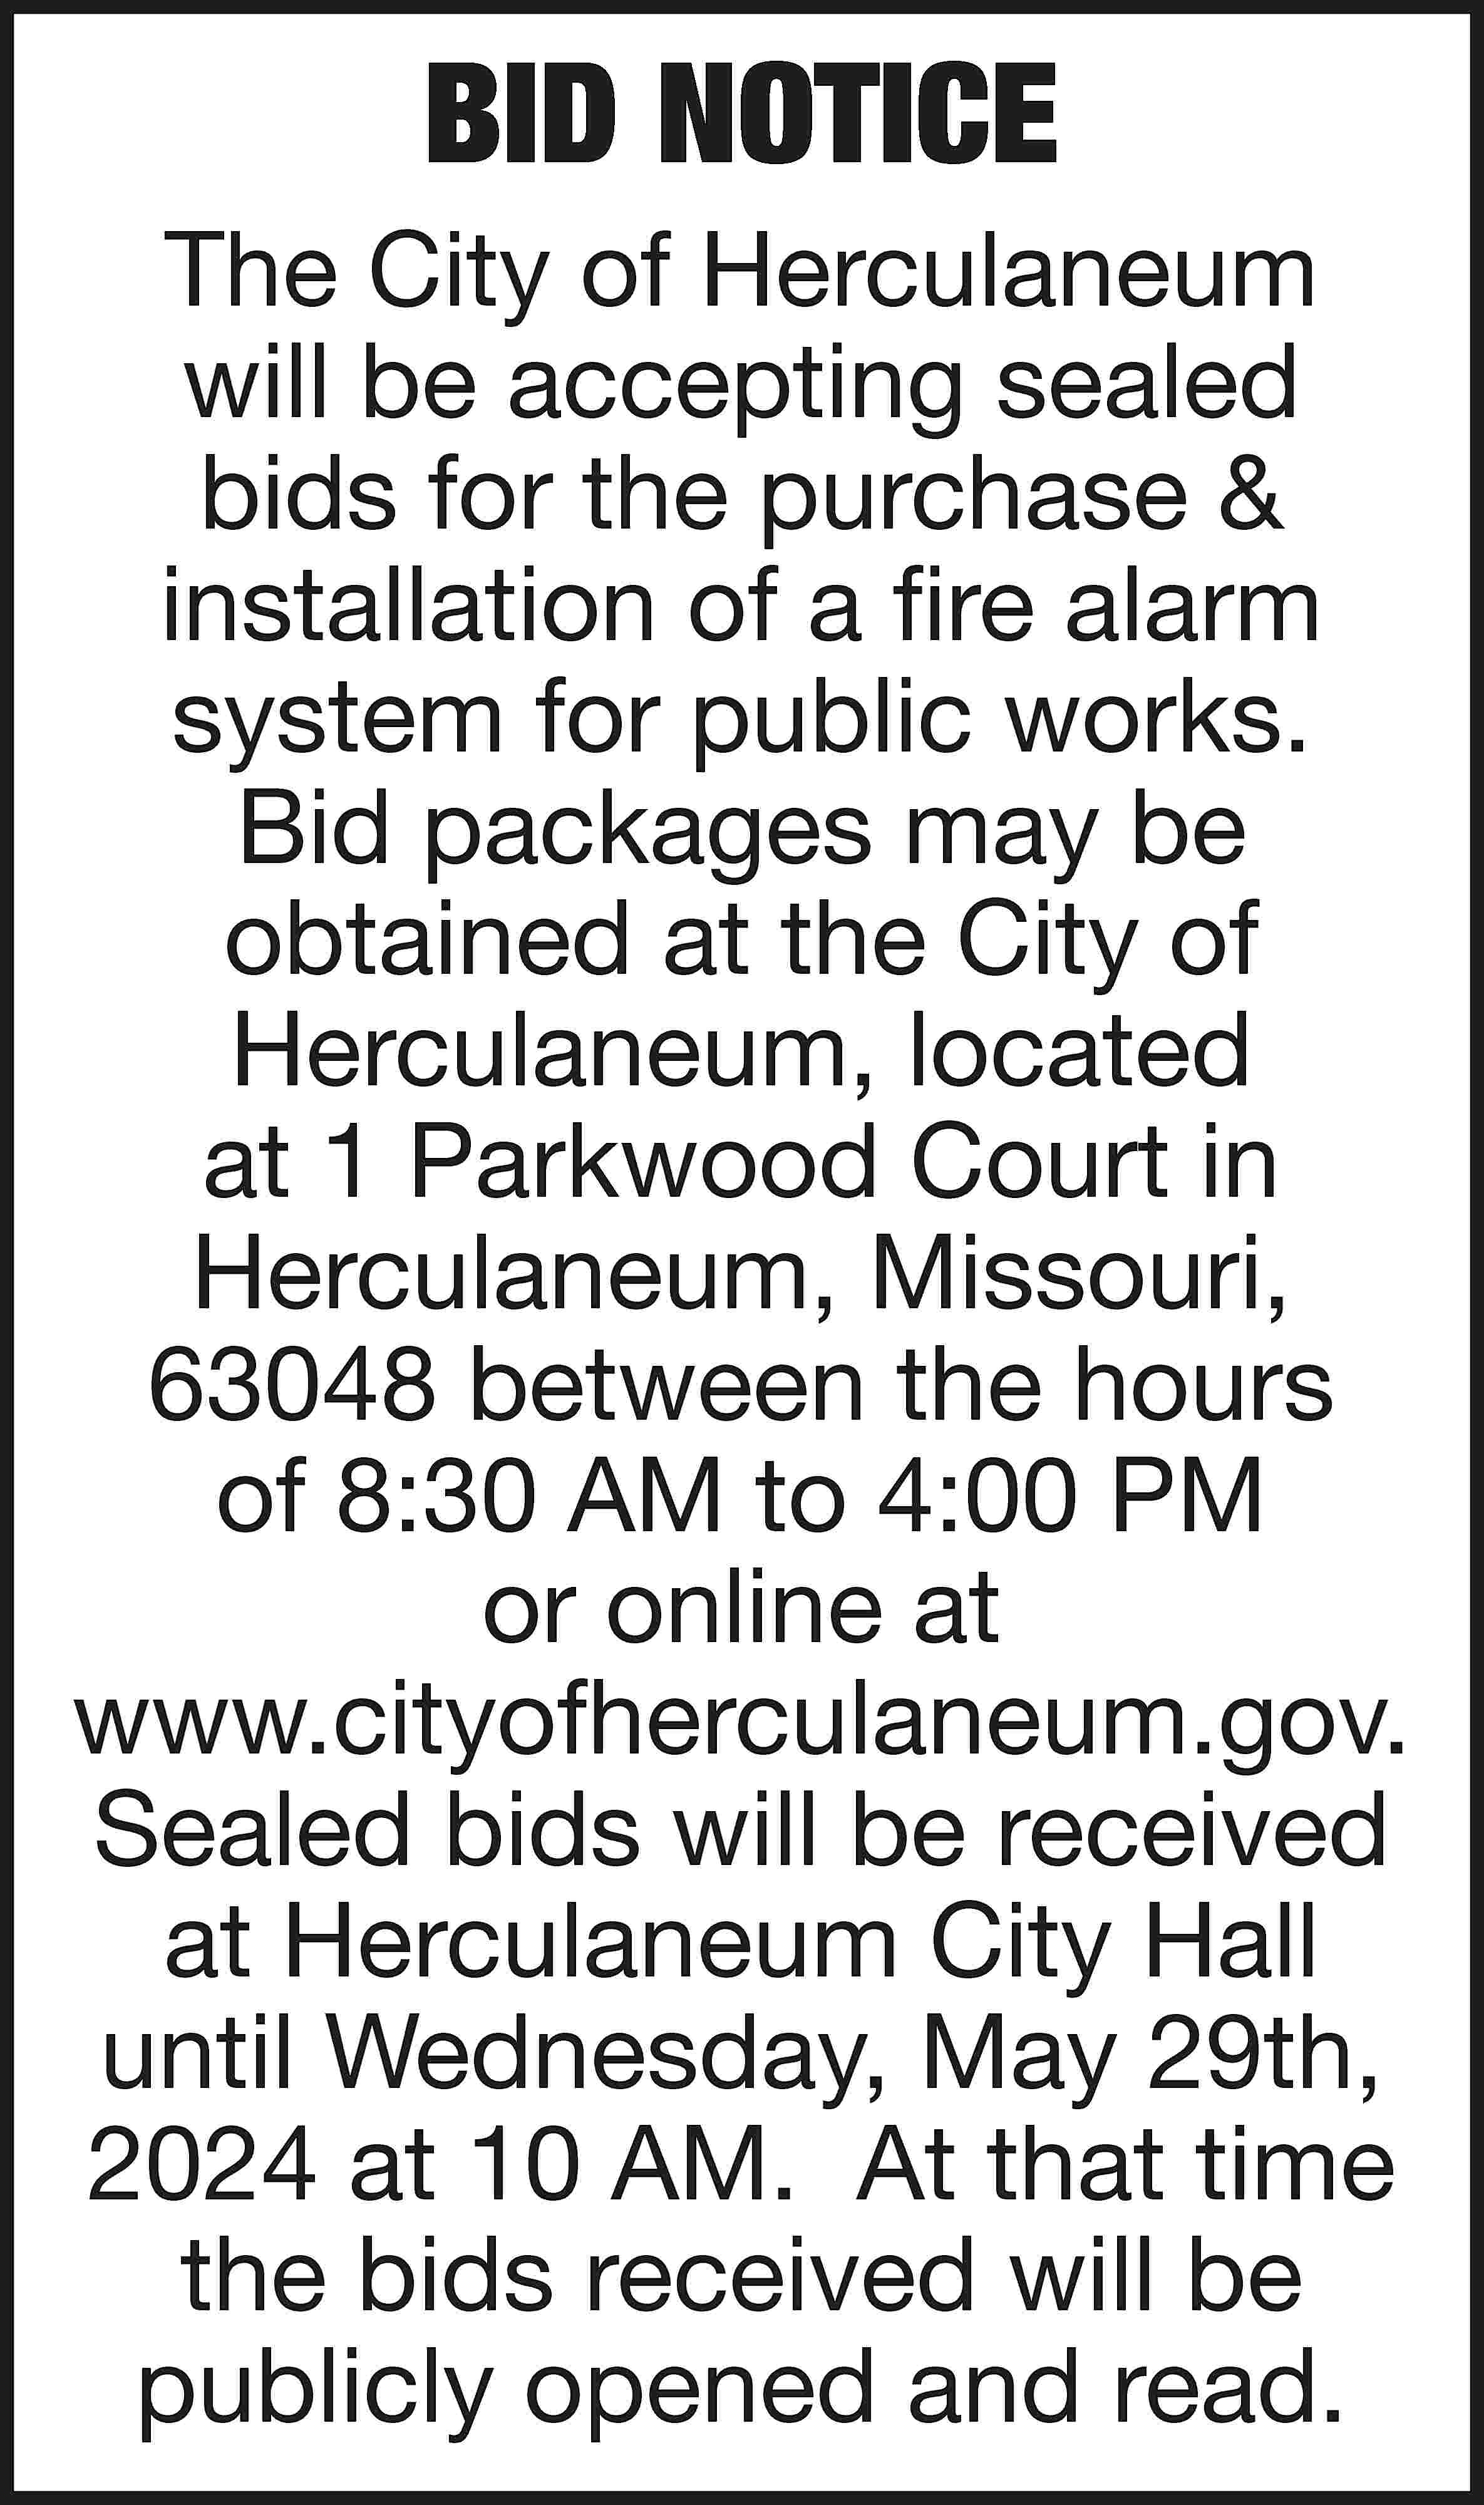 BID NOTICE The City of  BID NOTICE The City of Herculaneum will be accepting sealed bids for the purchase & installation of a fire alarm system for public works. Bid packages may be obtained at the City of Herculaneum, located at 1 Parkwood Court in Herculaneum, Missouri, 63048 between the hours of 8:30 AM to 4:00 PM or online at www.cityofherculaneum.gov. Sealed bids will be received at Herculaneum City Hall until Wednesday, May 29th, 2024 at 10 AM. At that time the bids received will be publicly opened and read.